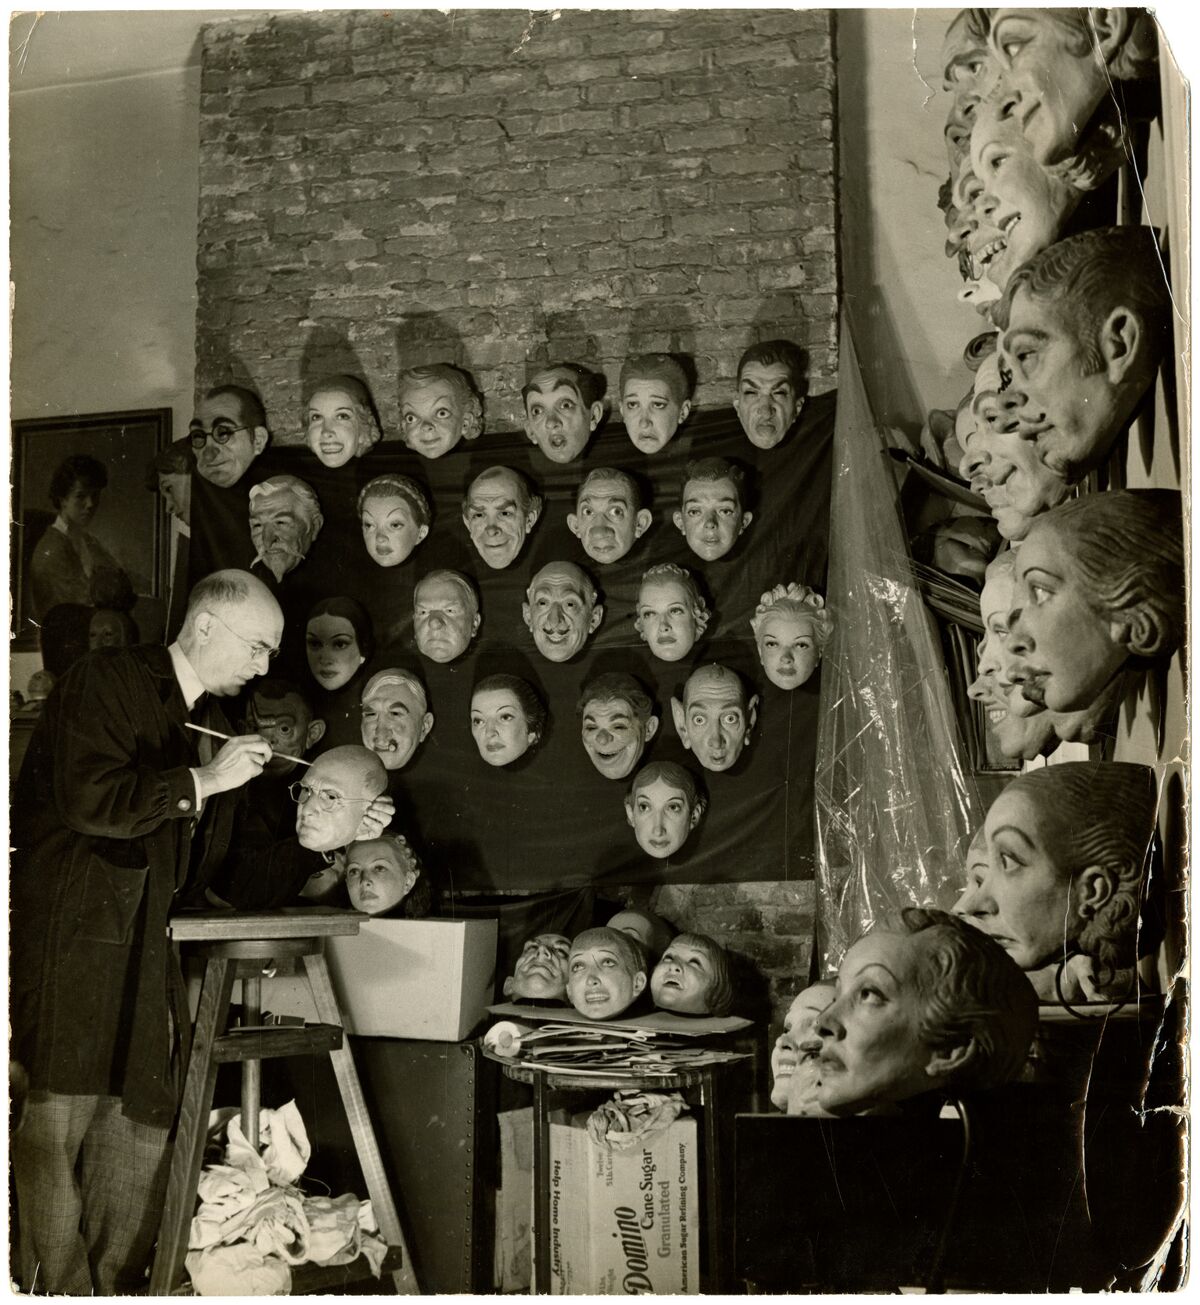 Doane Powell with wall of masks